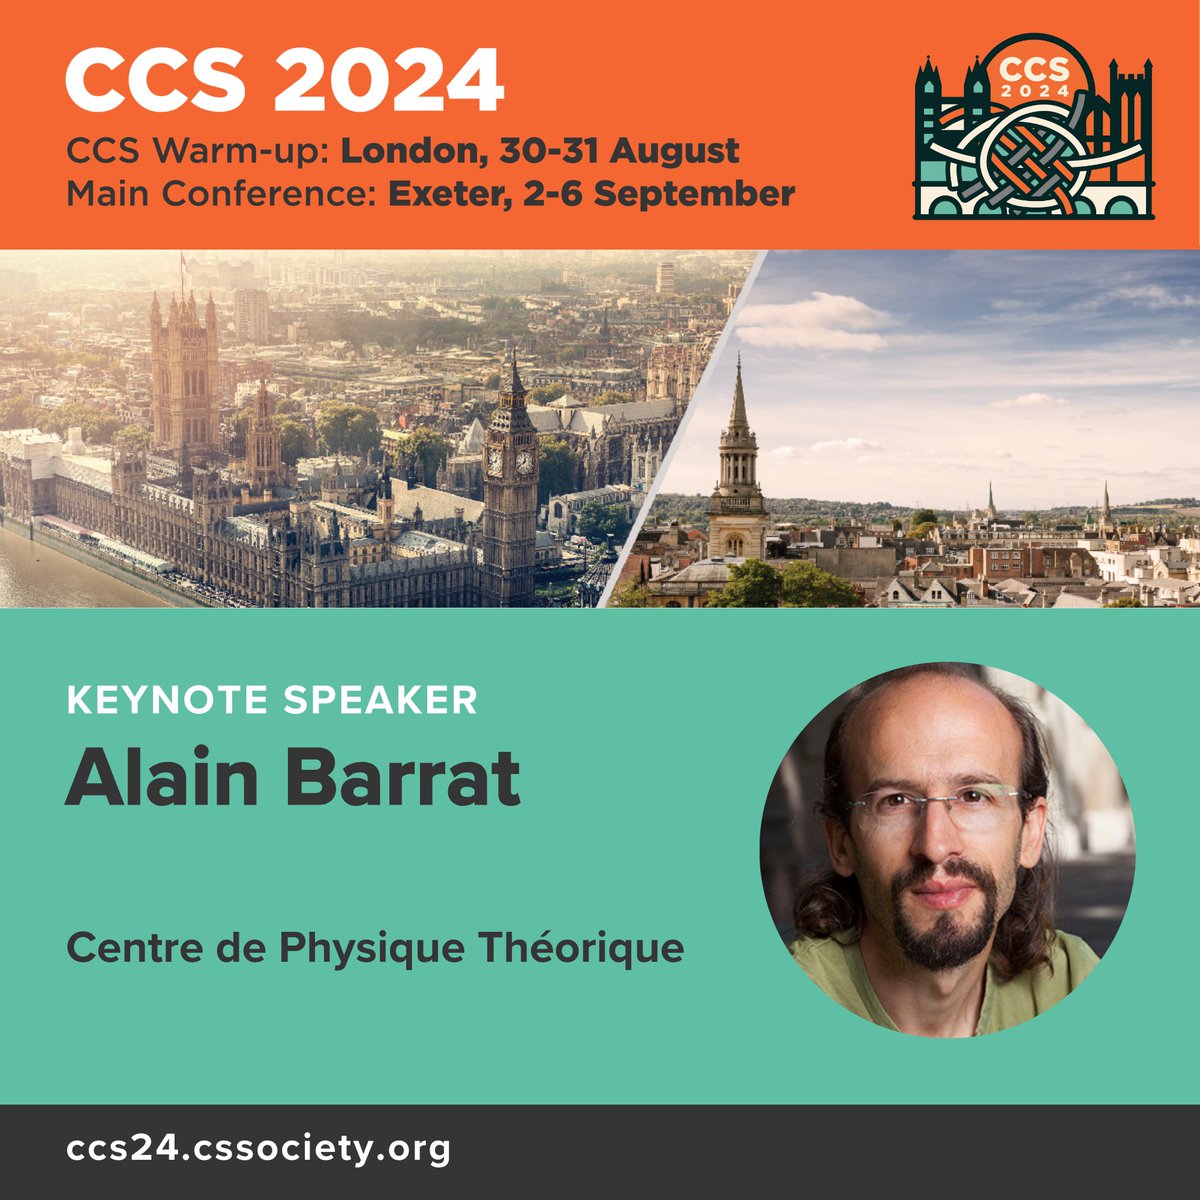 #KeynoteSpeaker @alainbarrat, Research Director at CNRS. Expert in complex networks and dynamical processes, with interdisciplinary applications from social to technological networks and epidemic spreading phenomena. Currently focusing on temporal networks and human behavior.